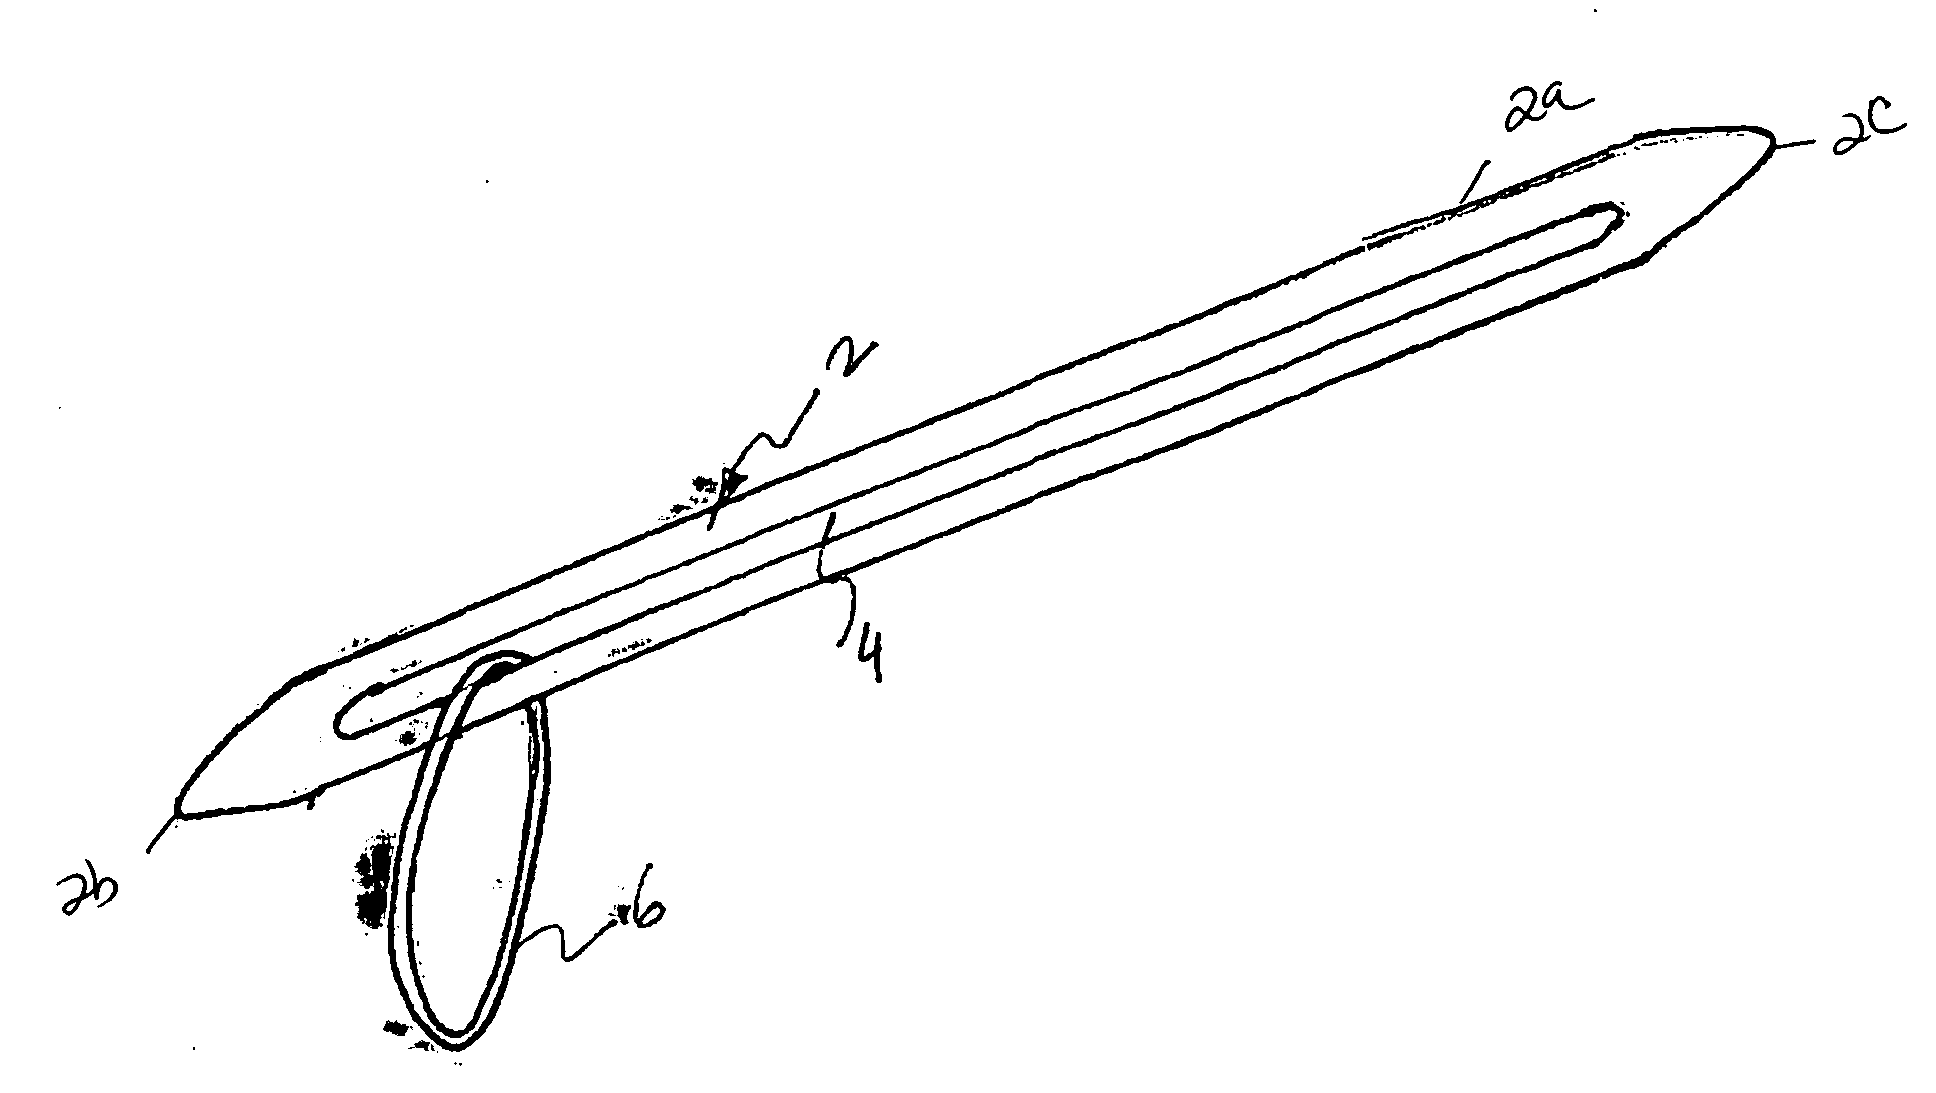 Hair styling apparatus and method of using same